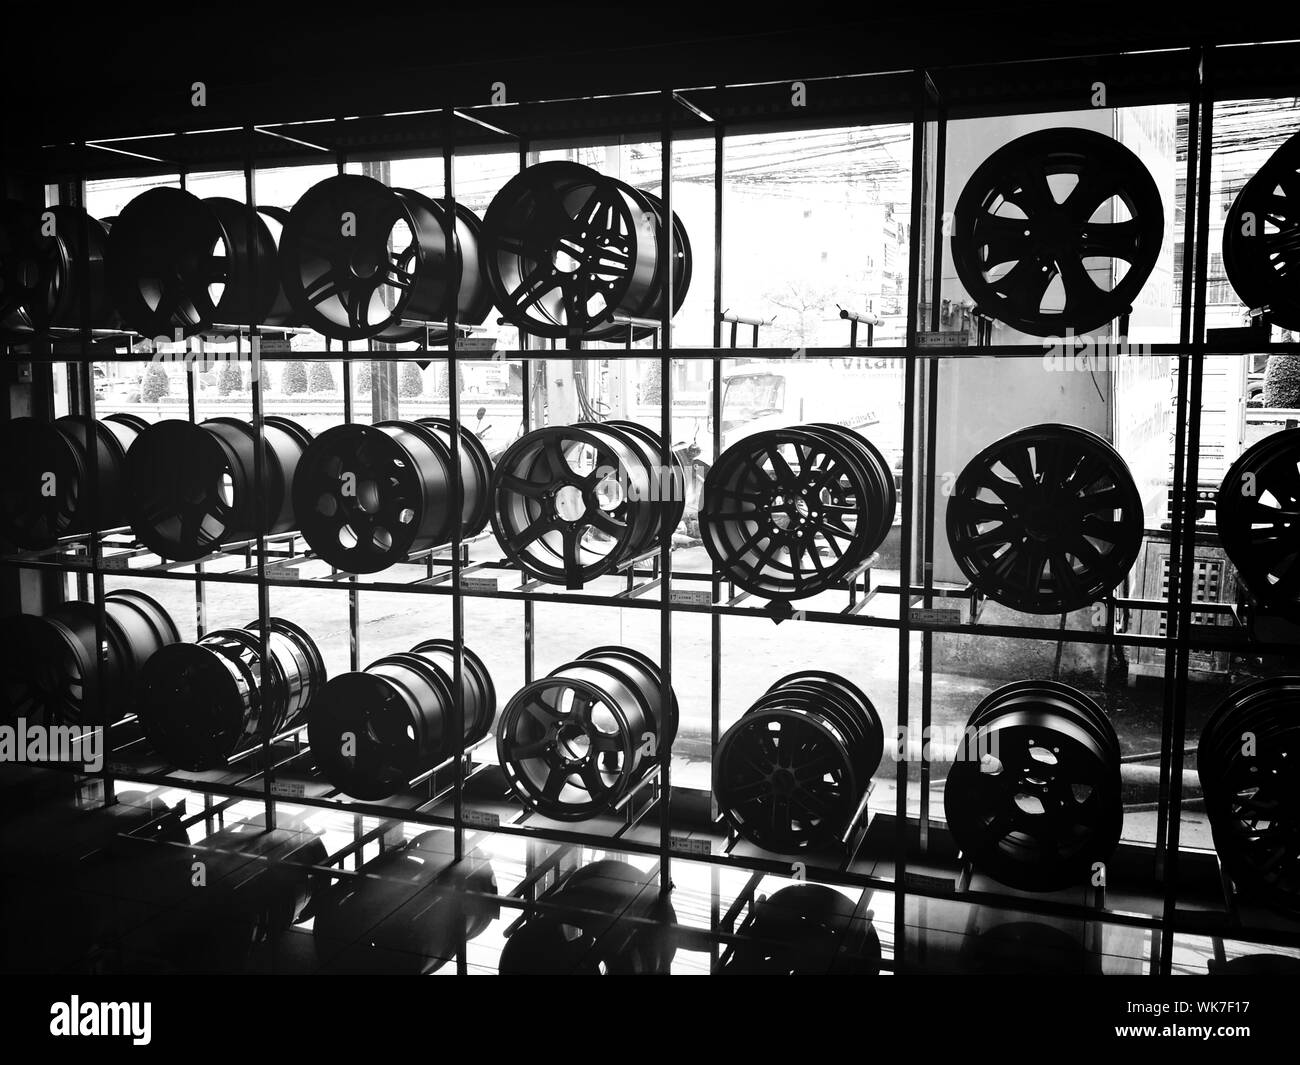 Alloy Wheels For Sale In Store Stock Photo - Alamy